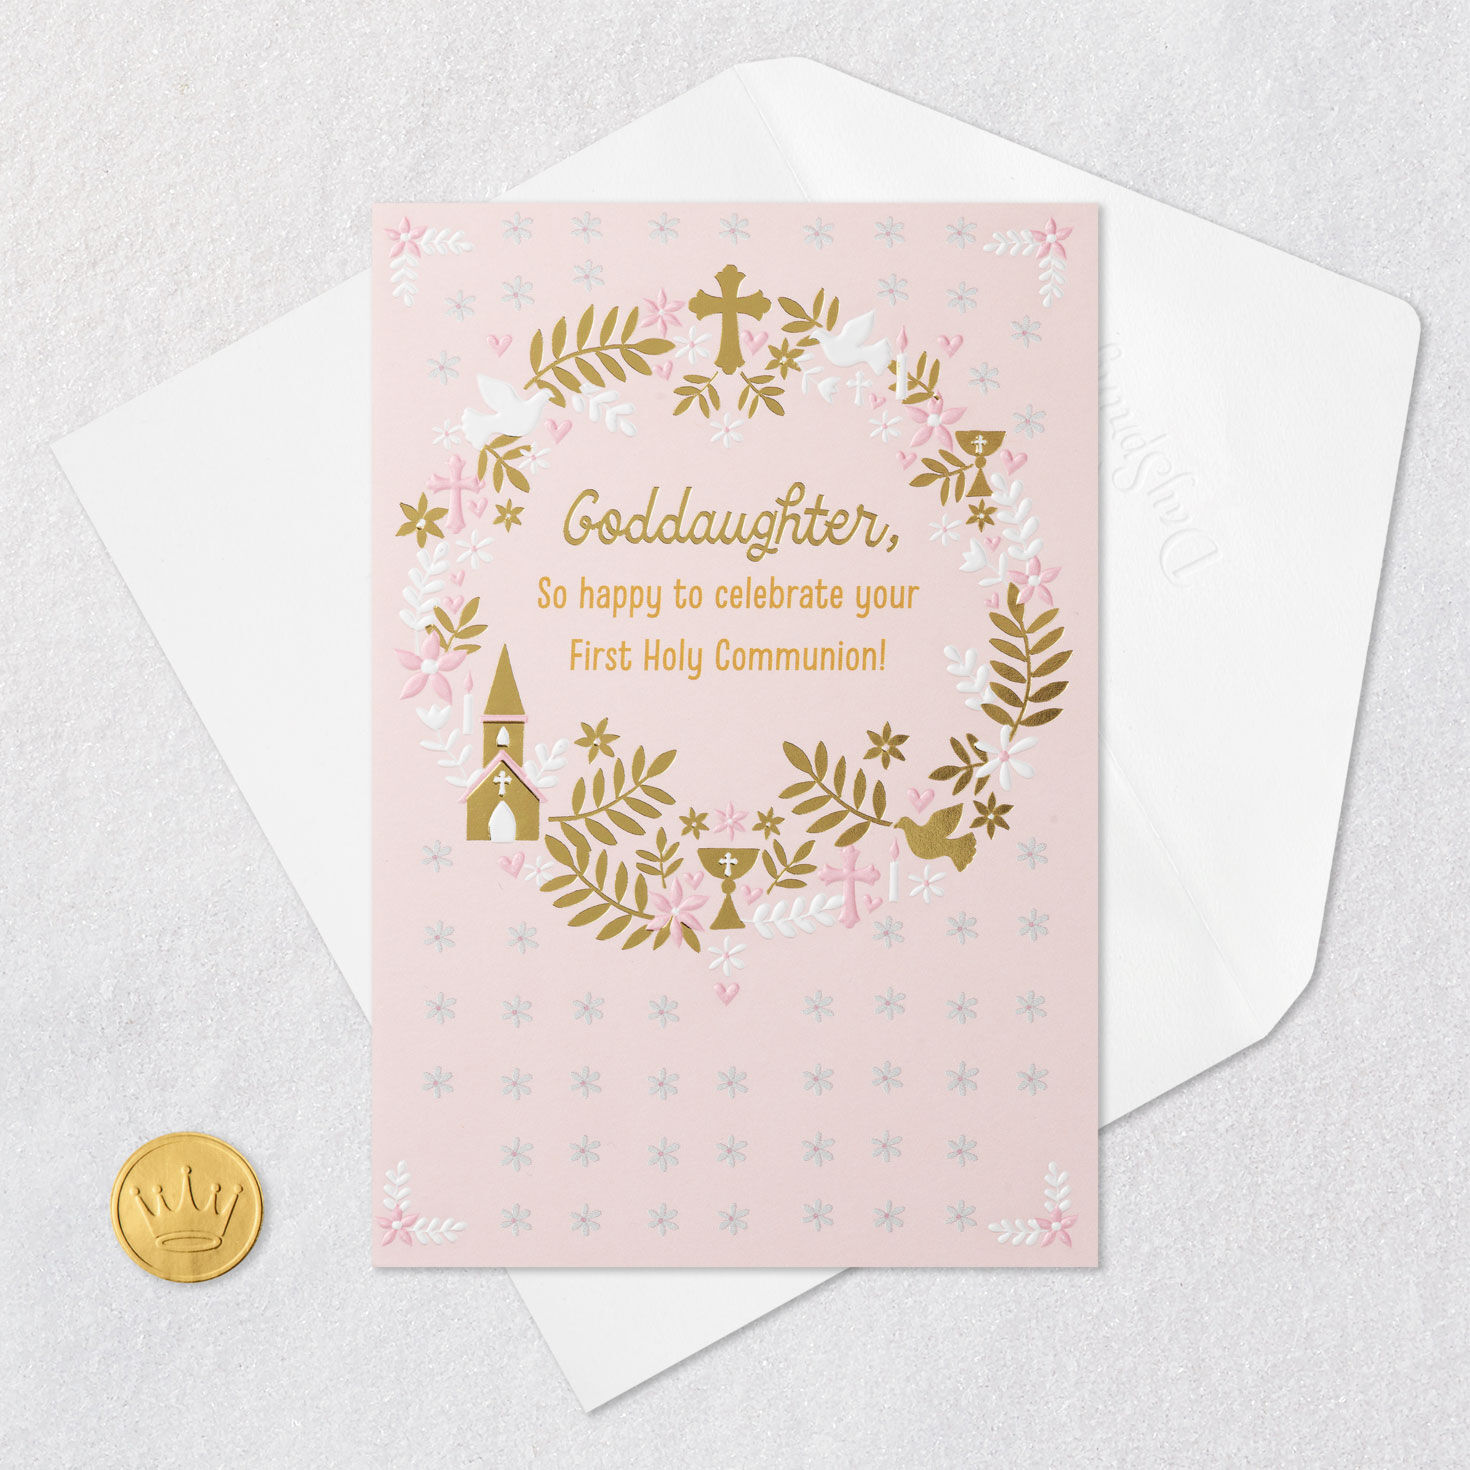 Jesus Loves You First Communion Card for Goddaughter for only USD 2.99 | Hallmark